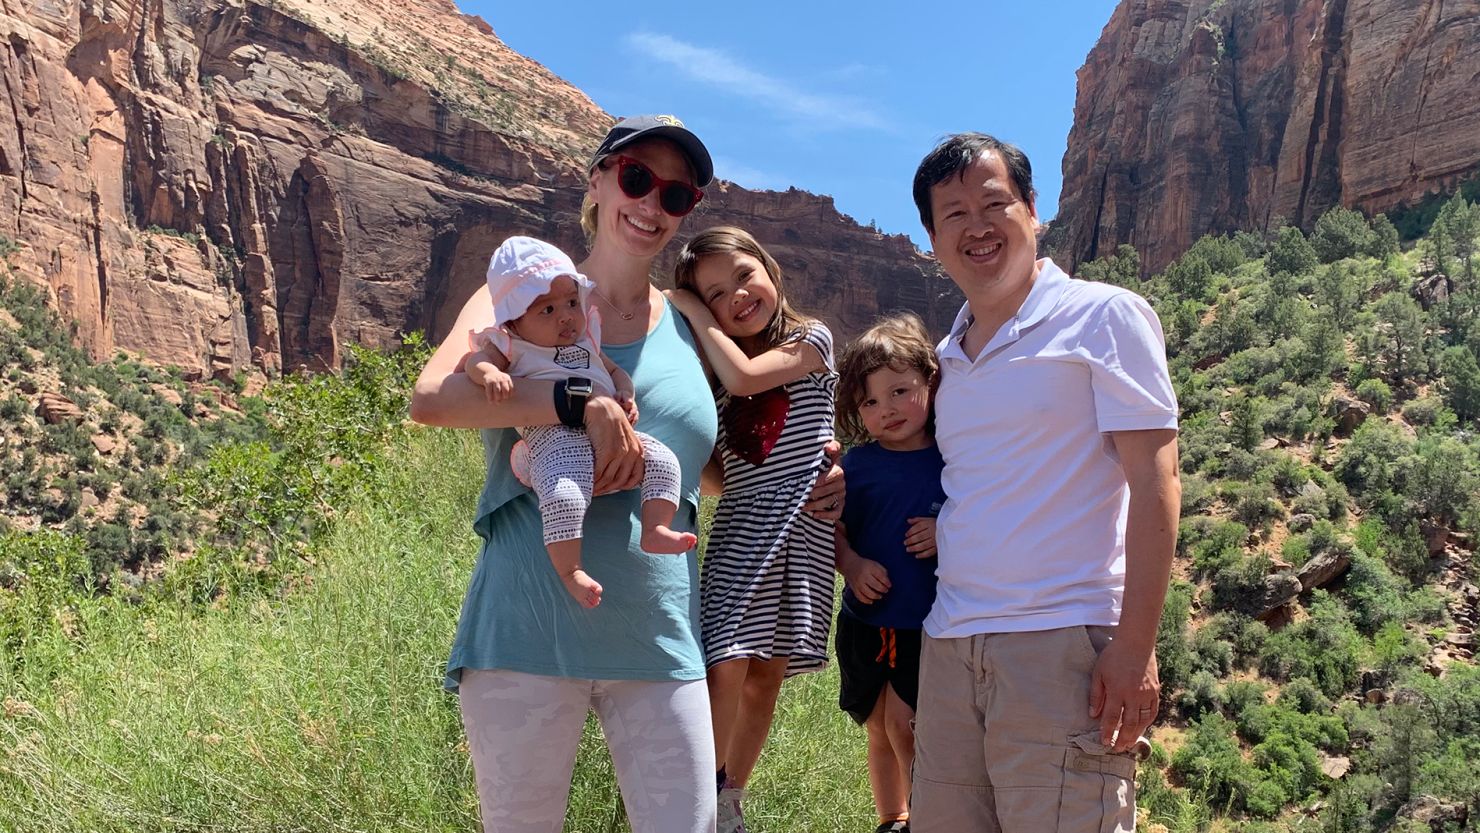 Dr. Erin Biro and Dr. CJ Bui volunteered all three of their children -- Sloane, 14 months; Ellie, 6; and Christian, 3; for Pfizer's pediatric Covid-19 vaccine trial.